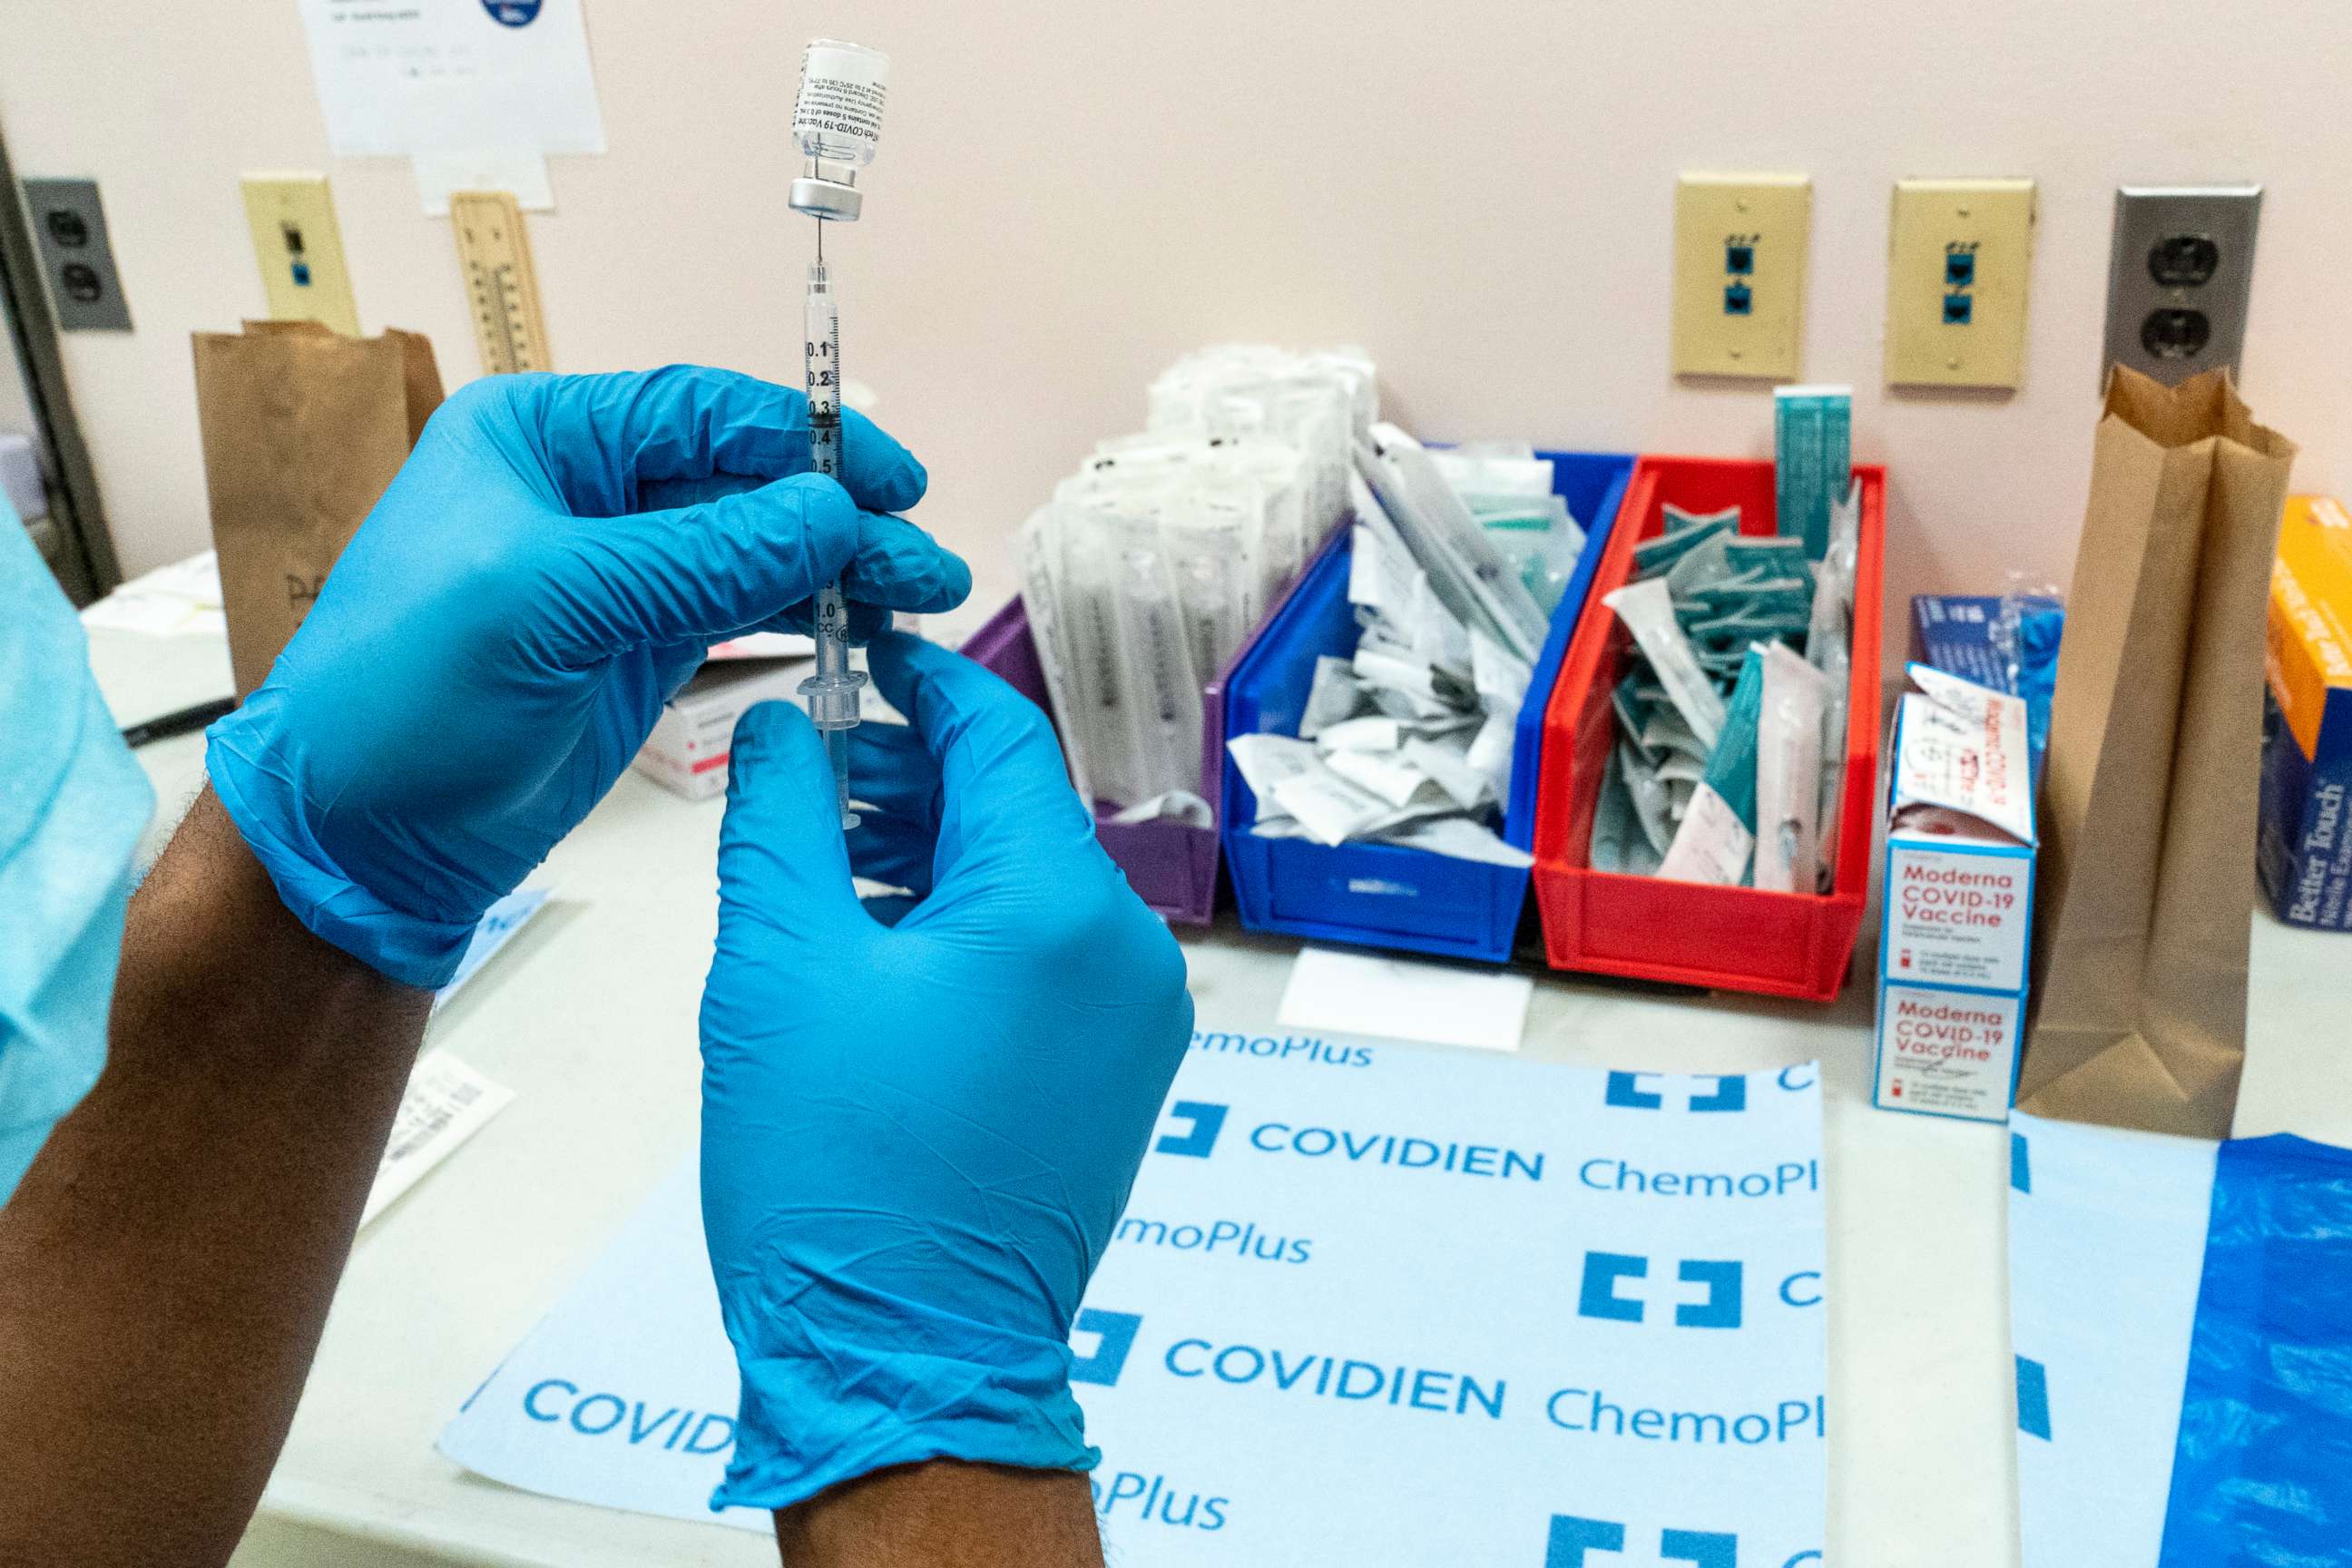 PHOTO: A pharmacist prepares a syringe with the Pfizer-BioNTech COVID-19 vaccine at a COVID-19 vaccination site, Feb. 18, 2021, in New York.